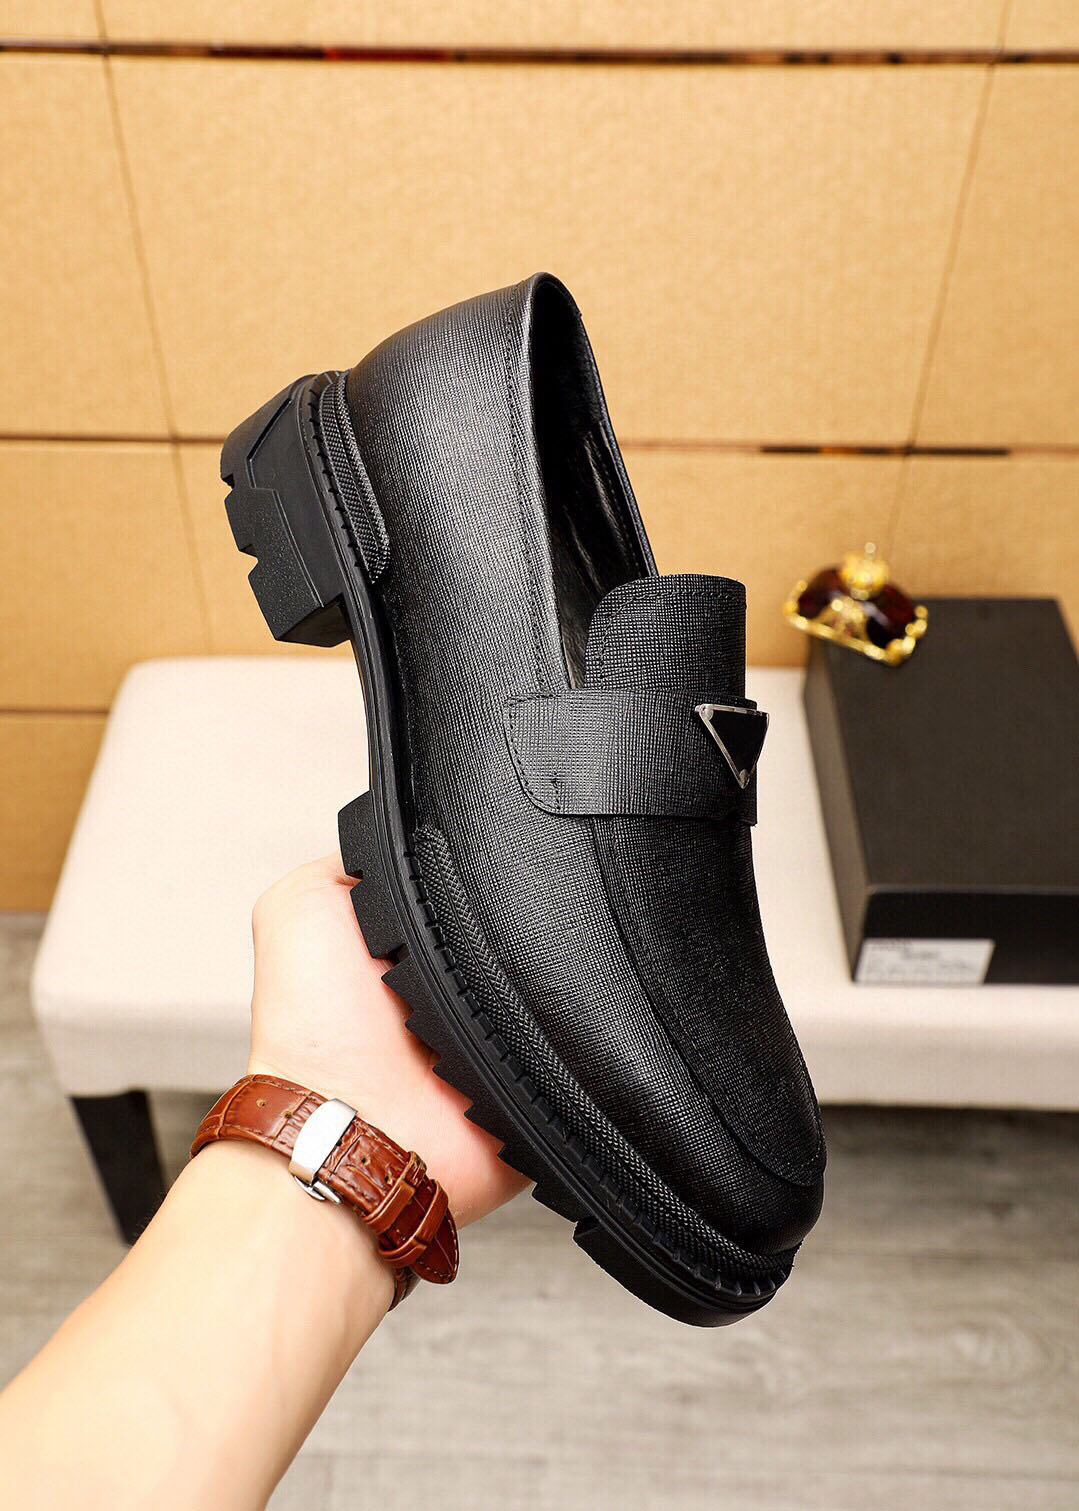 2023 Mens Dress Shoes Fashion Breathable Genuine Leather Platform Designer Casual Loafers Mocassins Wedding Party Oxford Shoes Size 38-45